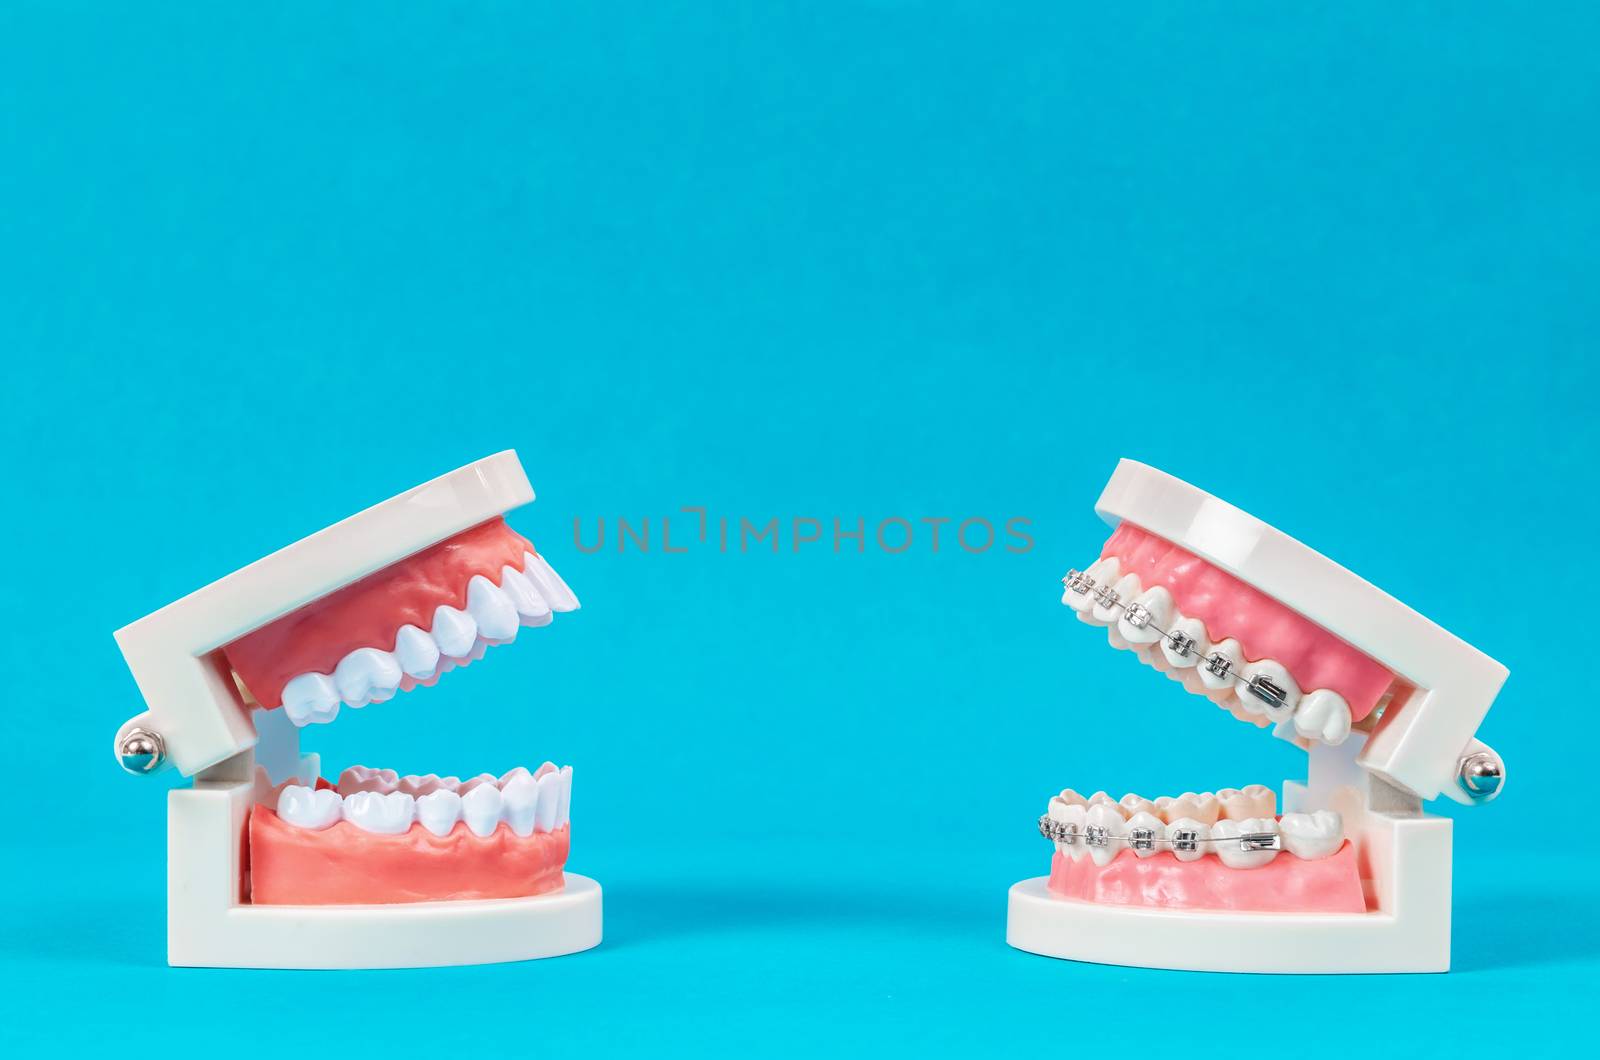 Compare tooth model and tooth model with metal wire dental brace by Gamjai